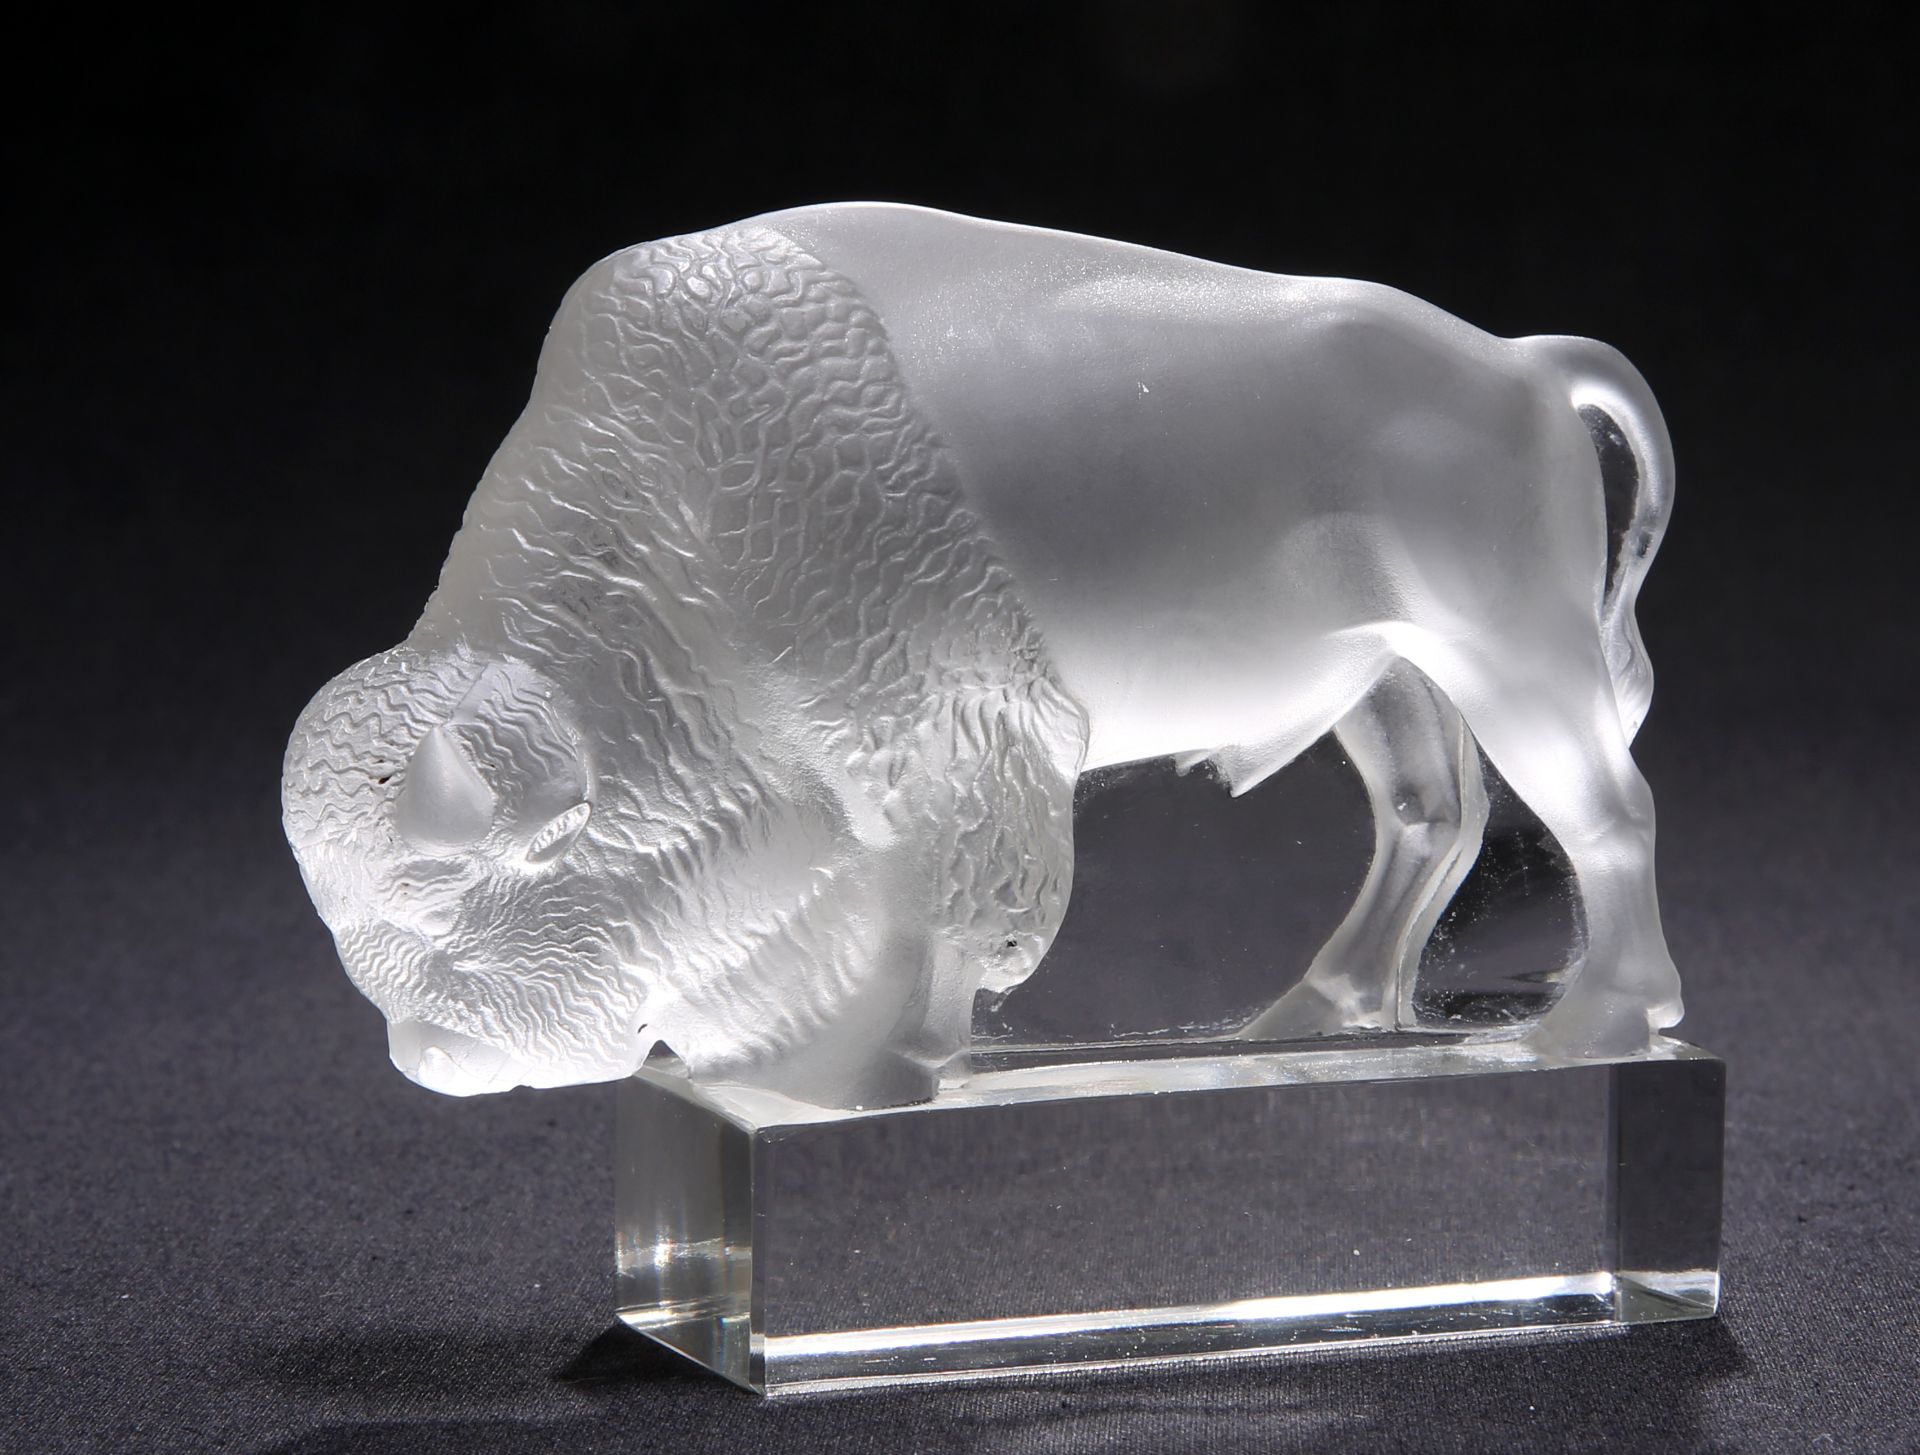 RENÉ LALIQUE (FRENCH, 1860-1945) A 'BISON' PAPERWEIGHT, DESIGNED IN 1931, clear glass, frosted and